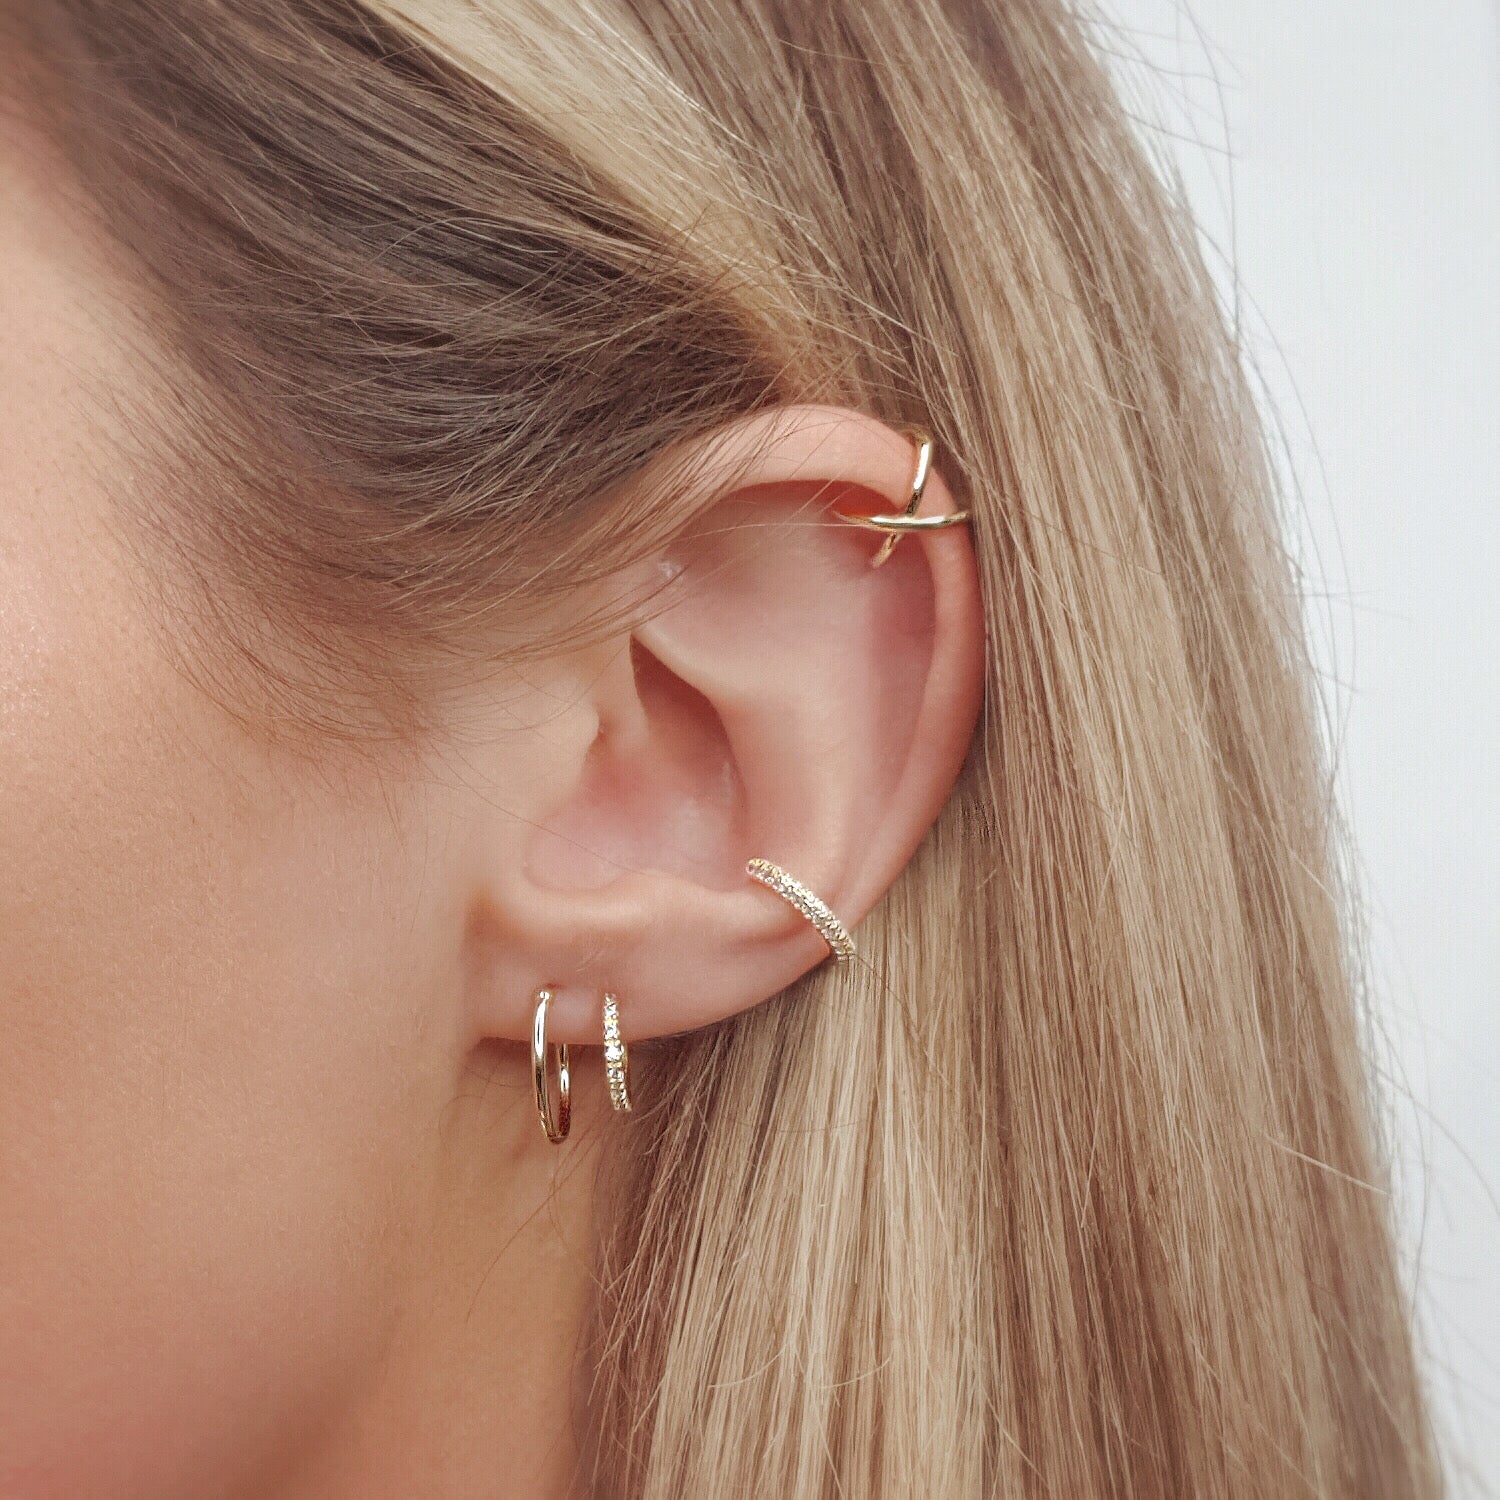 Sparkly gold plated cubic zirconia ear cuff with multiple Riptide 5 earrings, including gold plated double hoop earrings and gold plated criss cross ear cuff